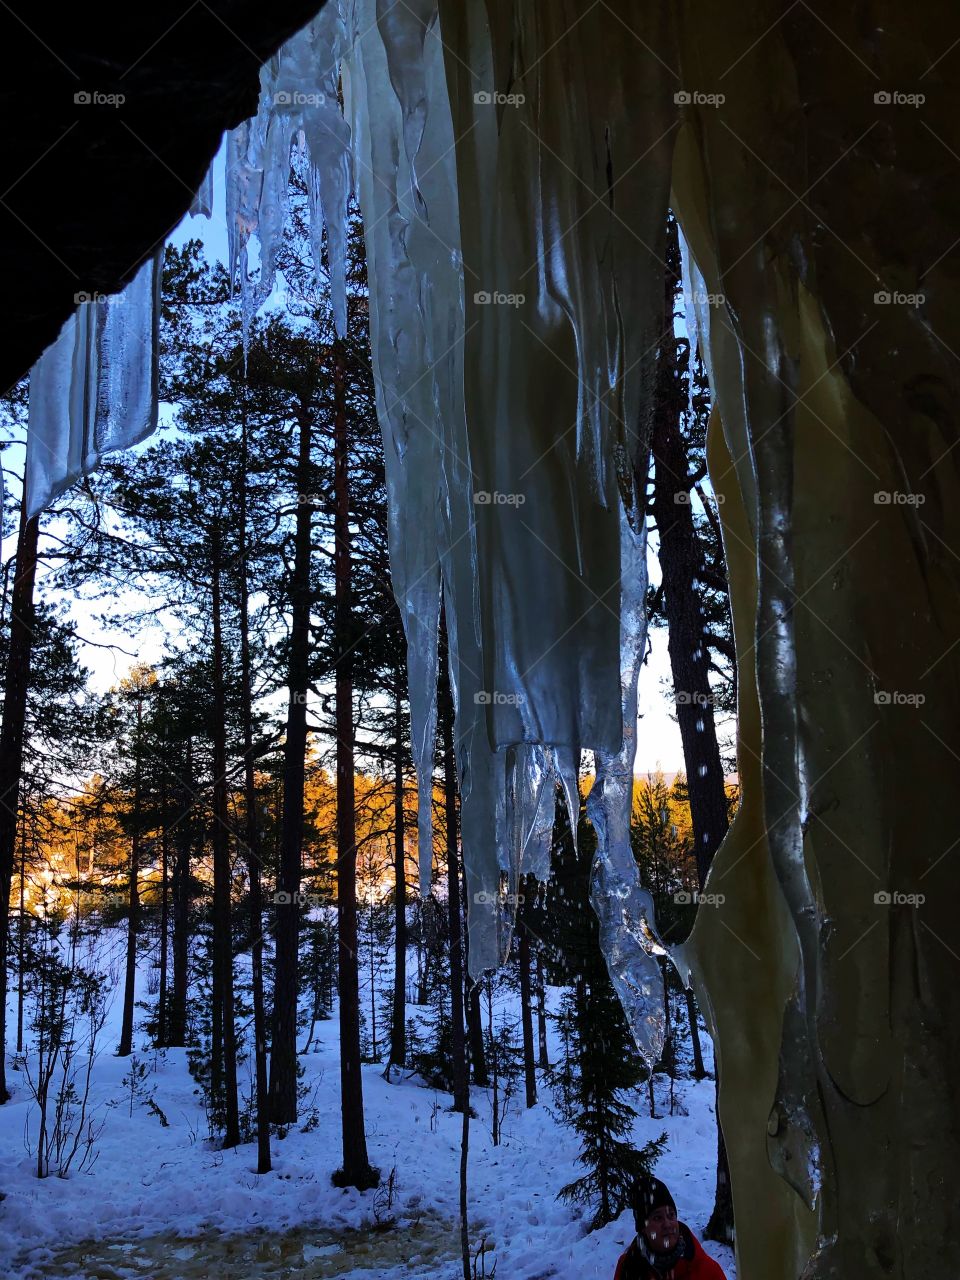 Ice in the Woods 